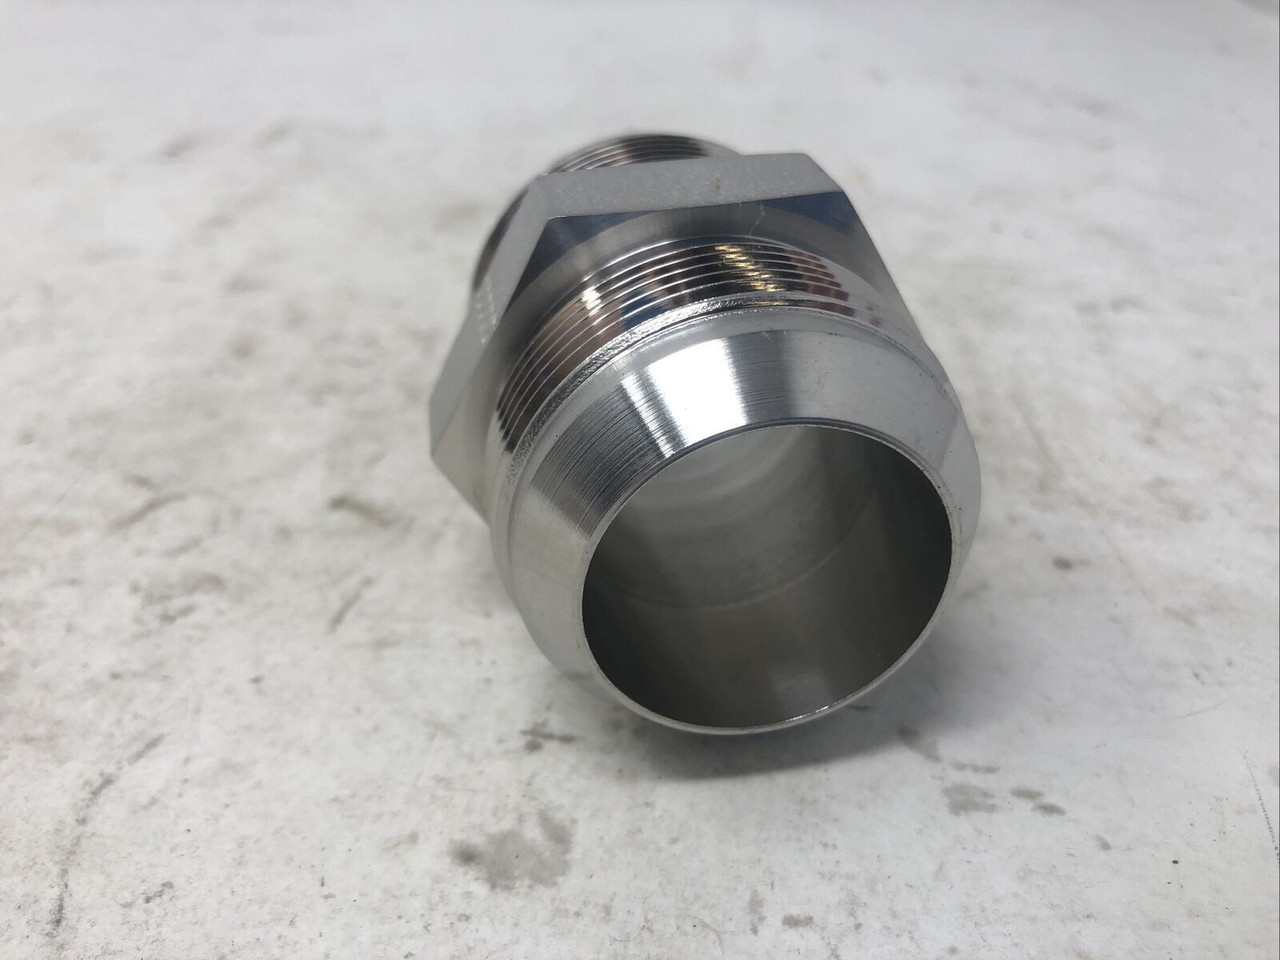 SWAGELOK FITTING 1 1/4" TO 1 1/4" HYDRAULIC COUPLING SS316 - PREOWNED